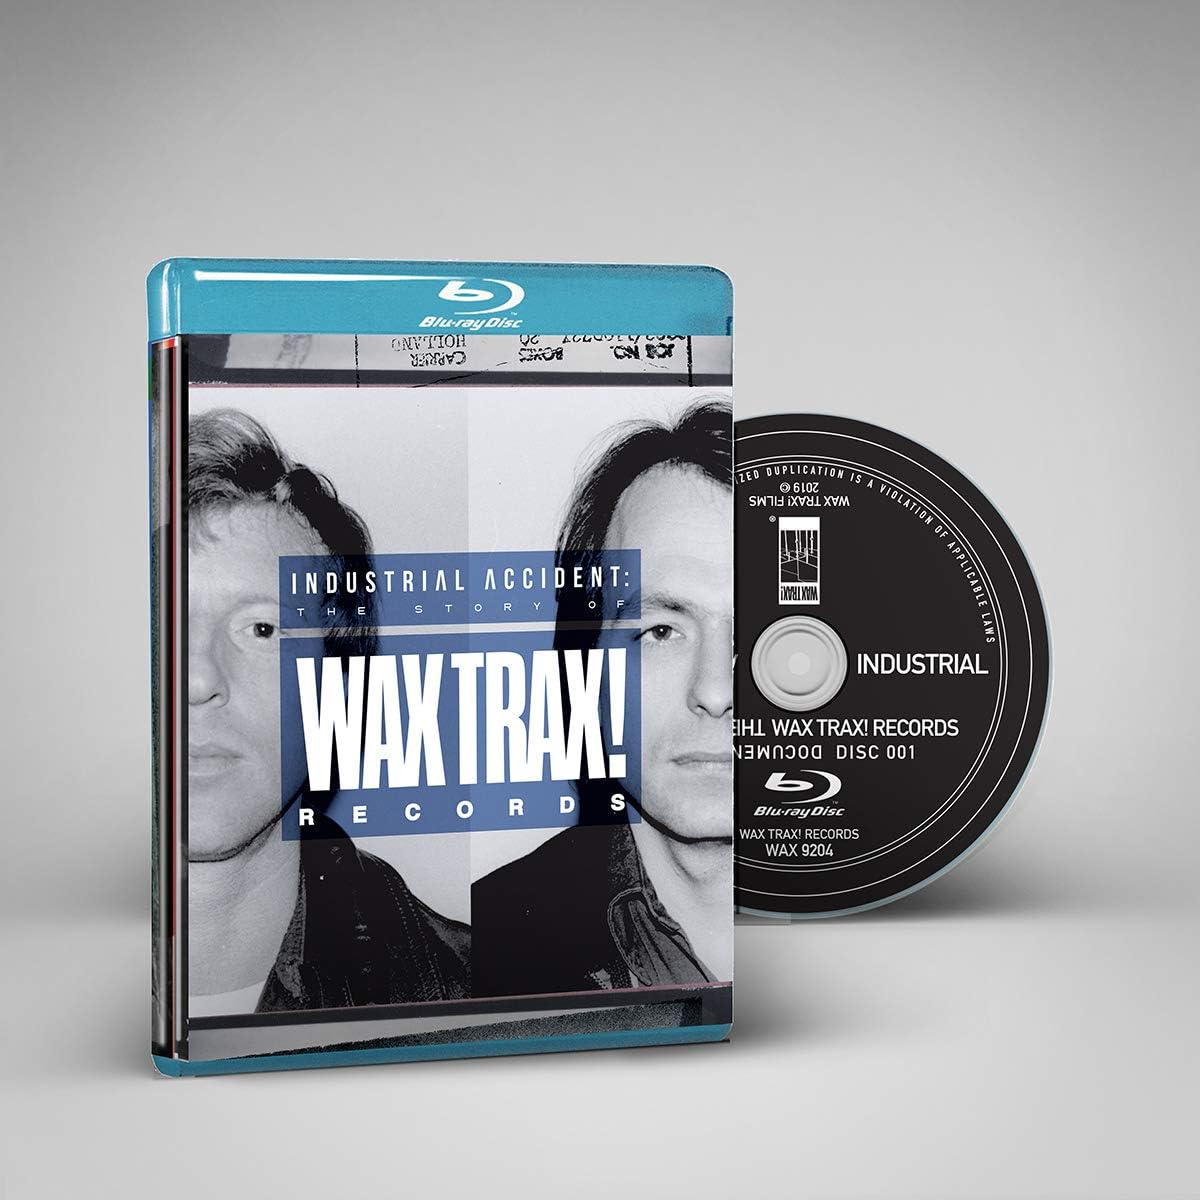 BluRay - Industrial Accident: The Story of Wax Trax! Records Documentary